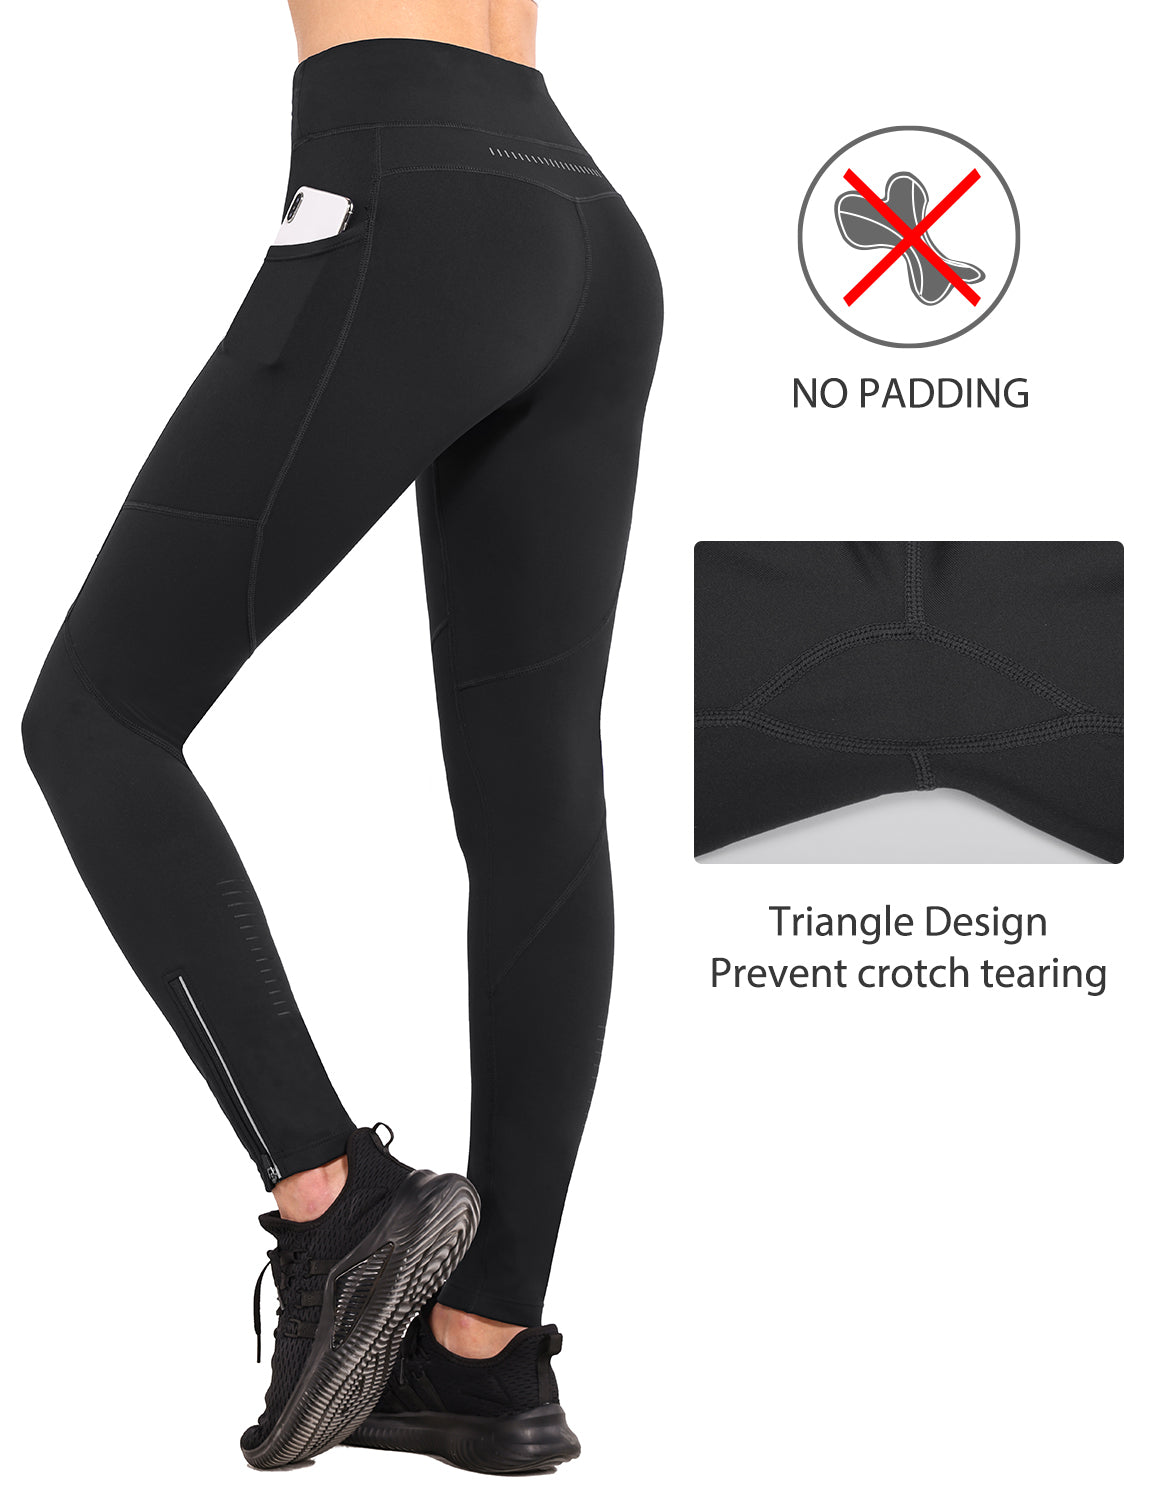 BALEAF Women's Fleece Lined Leggings Water Resistant High Waisted Thermal Hiking Pants Winter Running Tights Zip Pockets Black L - image 5 of 8